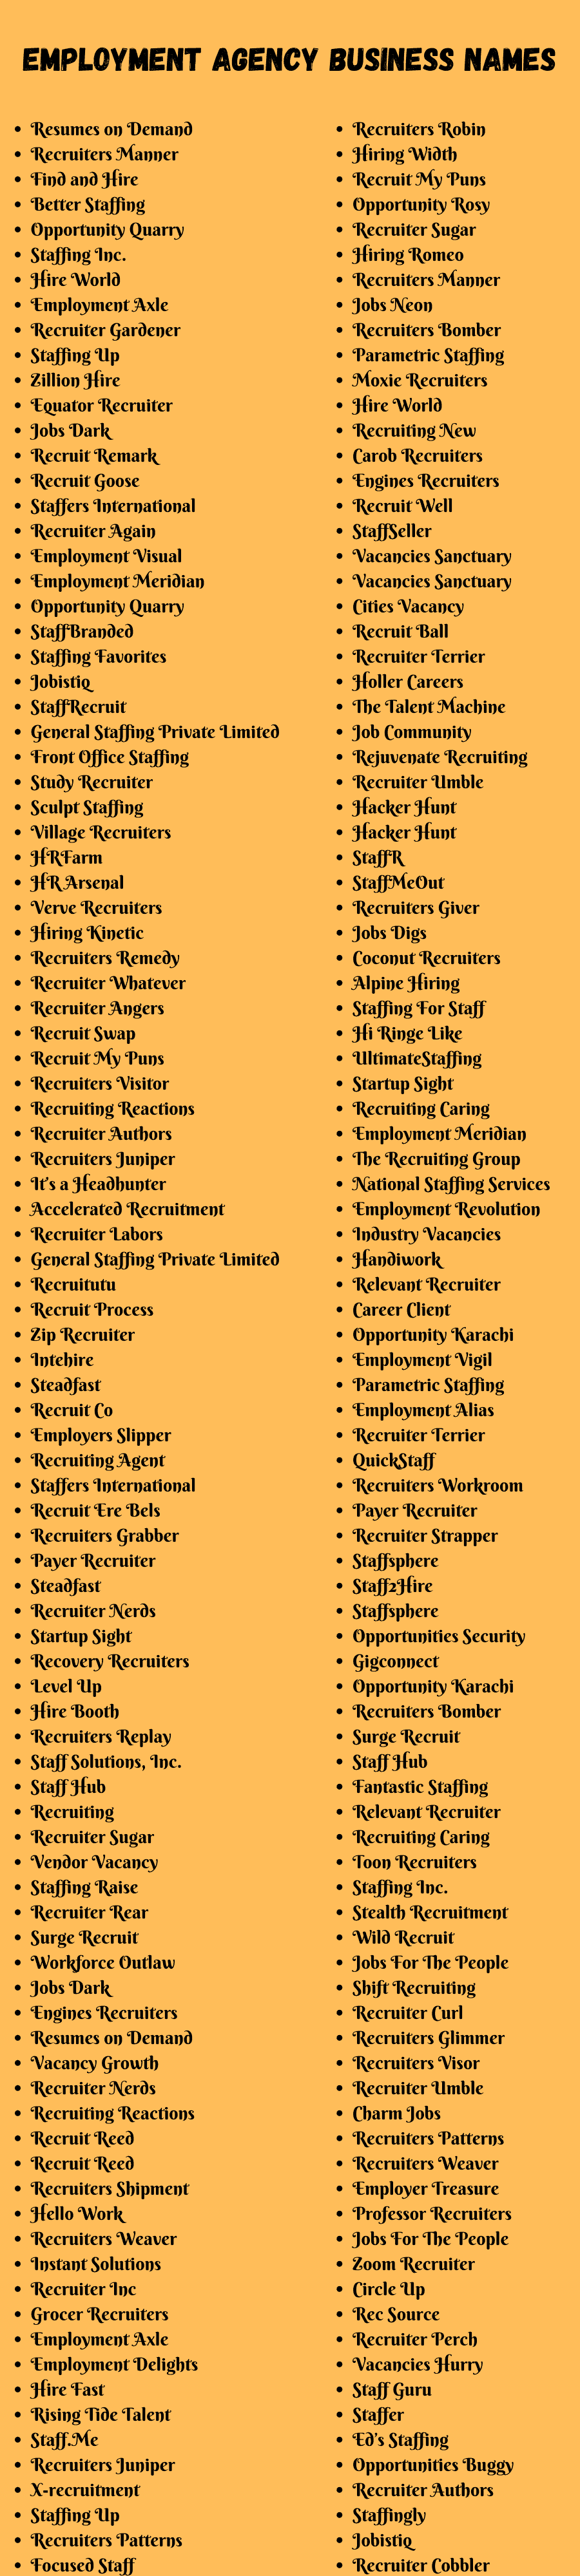 Employment Agency Business Names